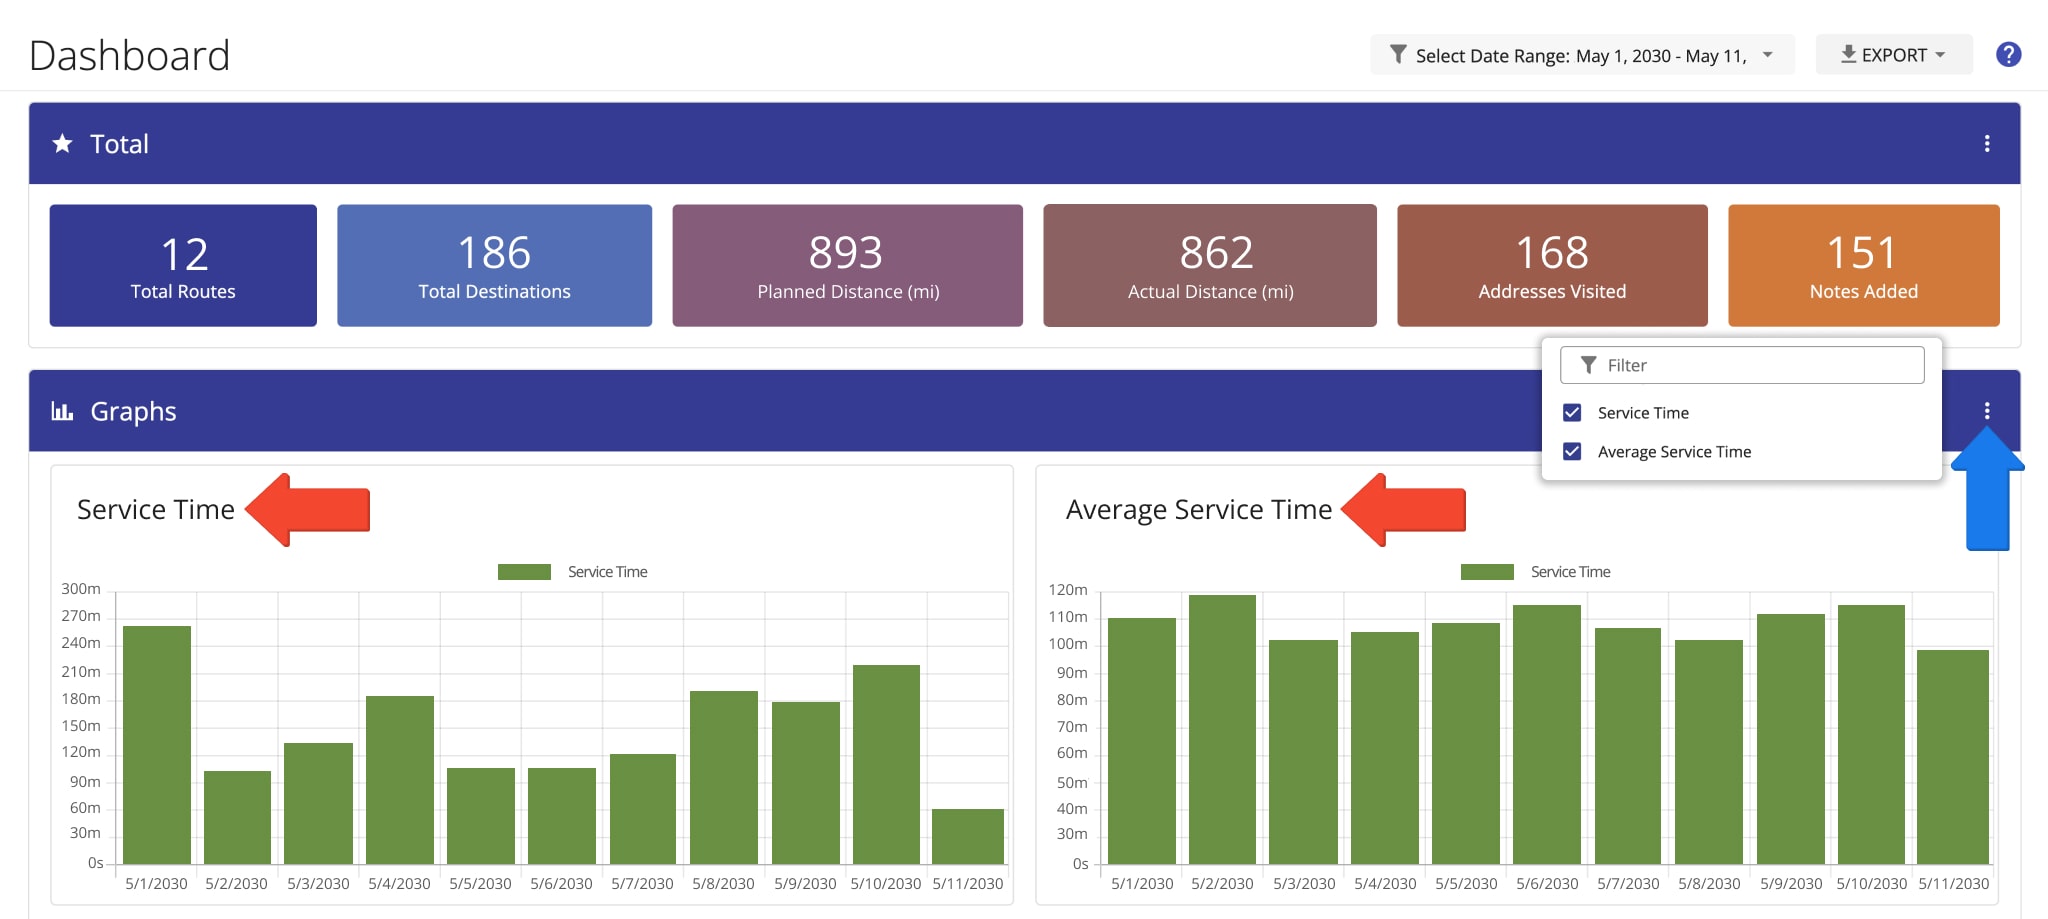 In addition to time on site, your Dashboard enables you to view the total and average Service Time of destinations.